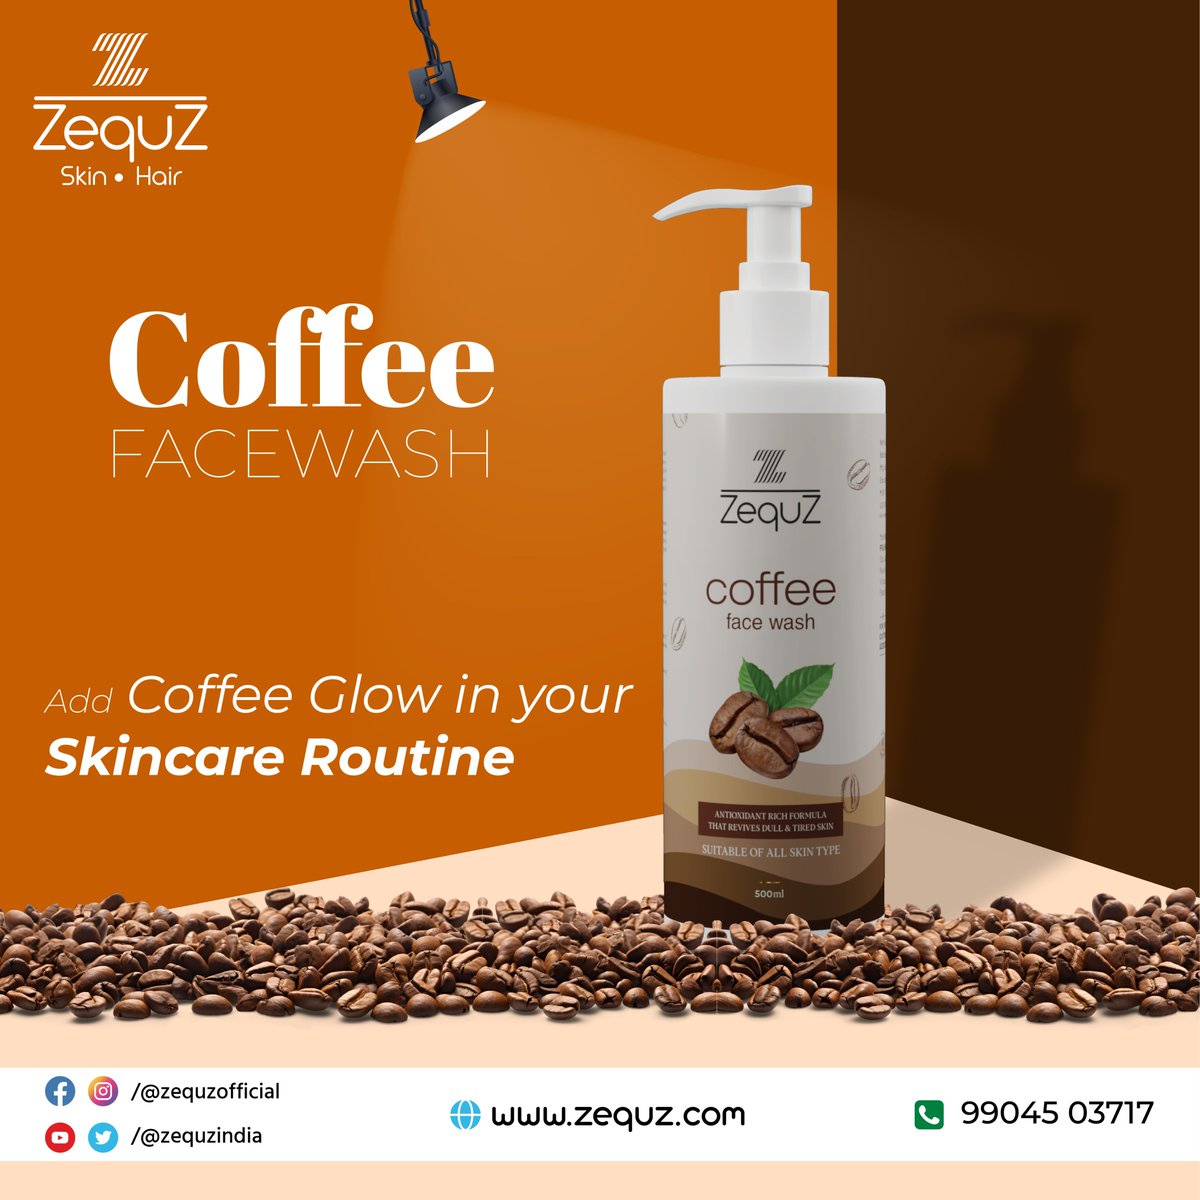 Add coffee glow to your skincare routine for a Shiny and healthy source of skin.

Order now: Link in Bio!
#Coffee #skincareroutine #beautyproducts #dailyuseonlyzequz